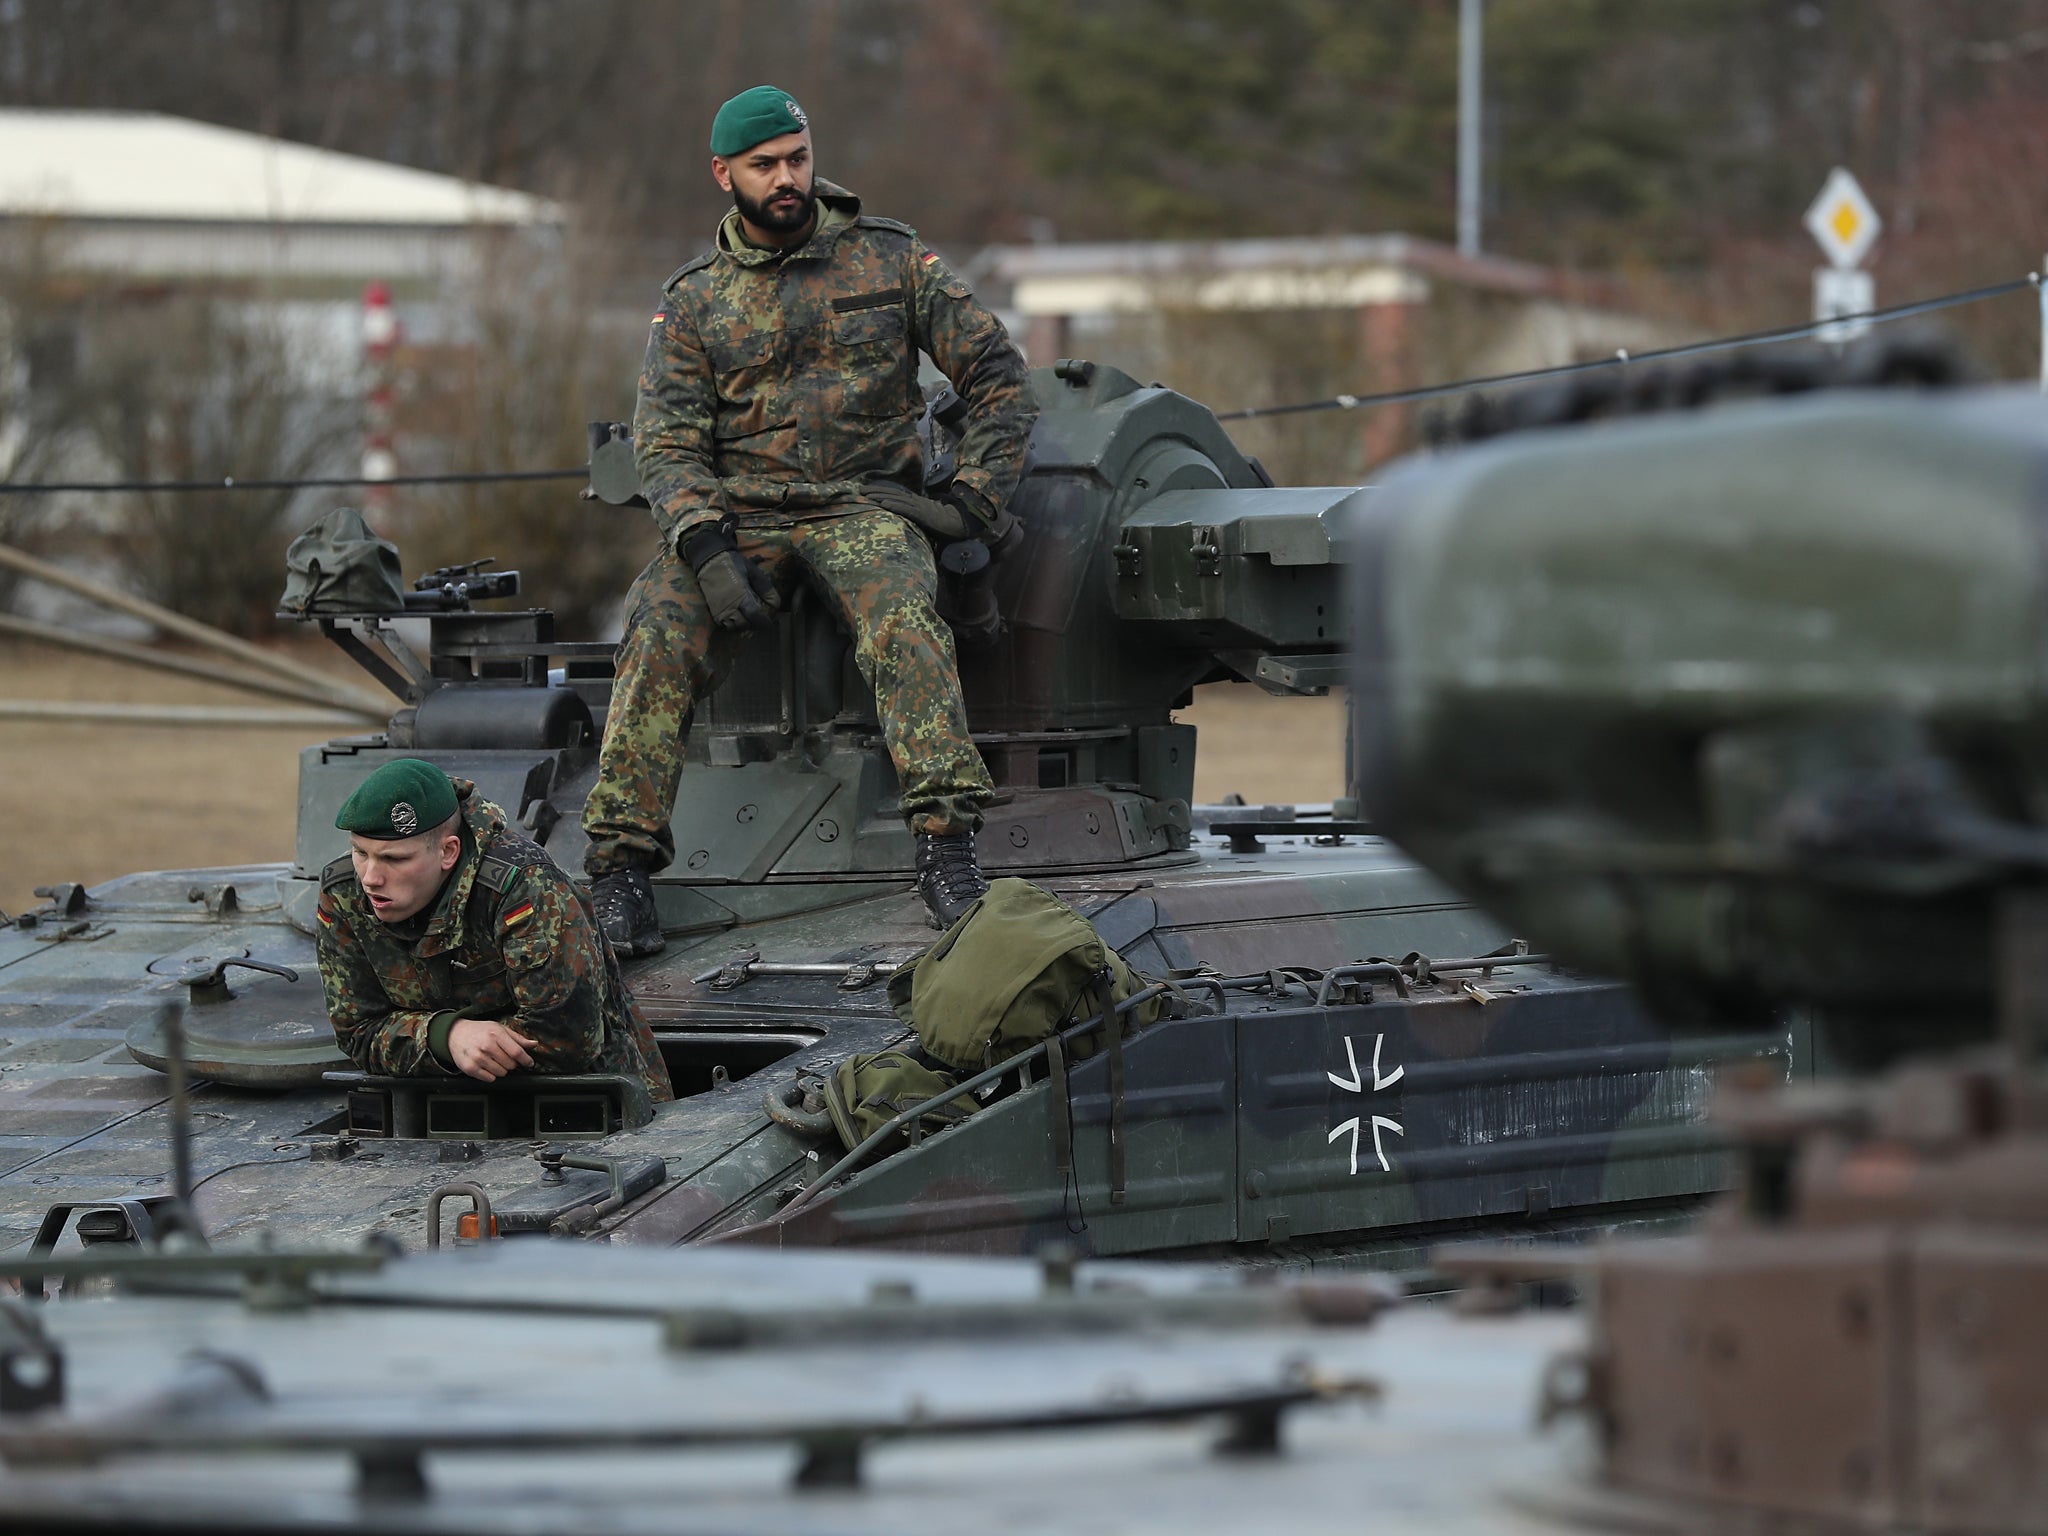 Soldiers of the Bundeswehr, the German armed forces, prepare to drive Marder light tanks onto a train for transport to Lithuania